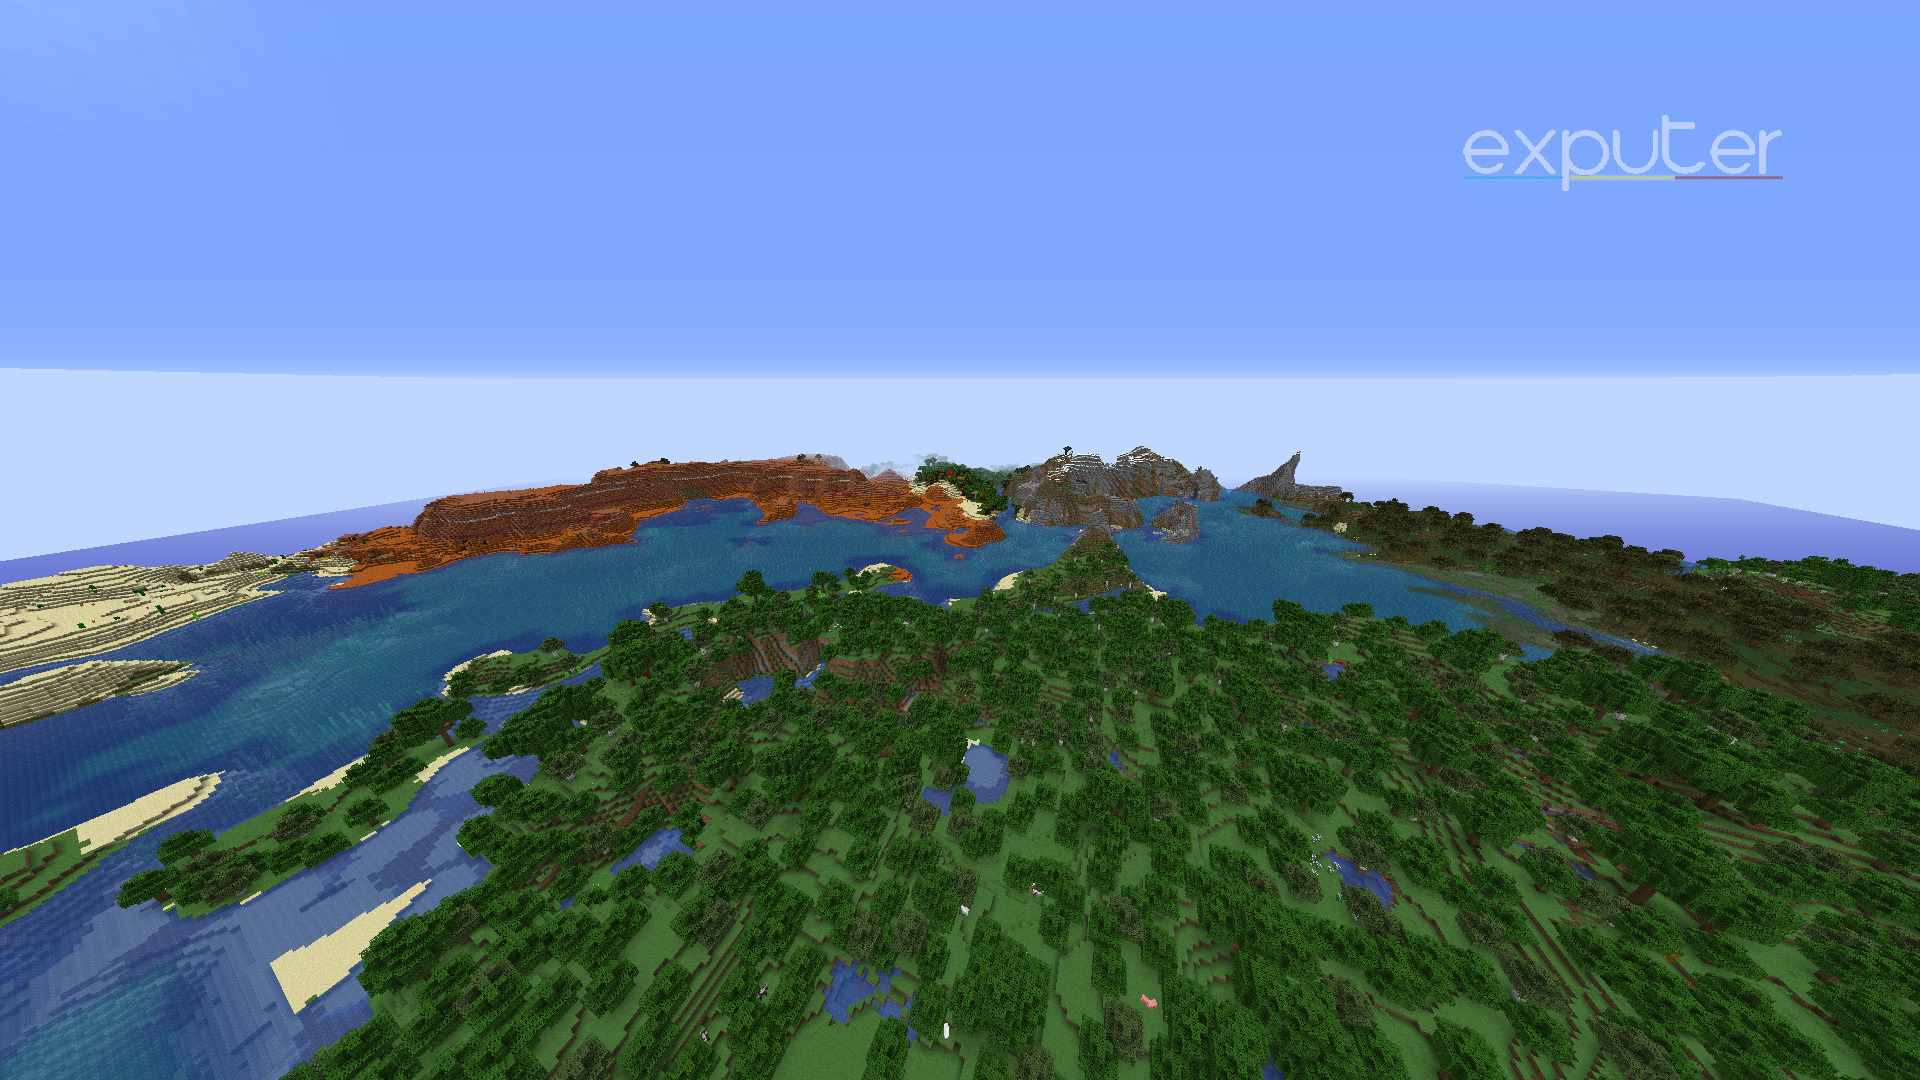 Some different biomes.